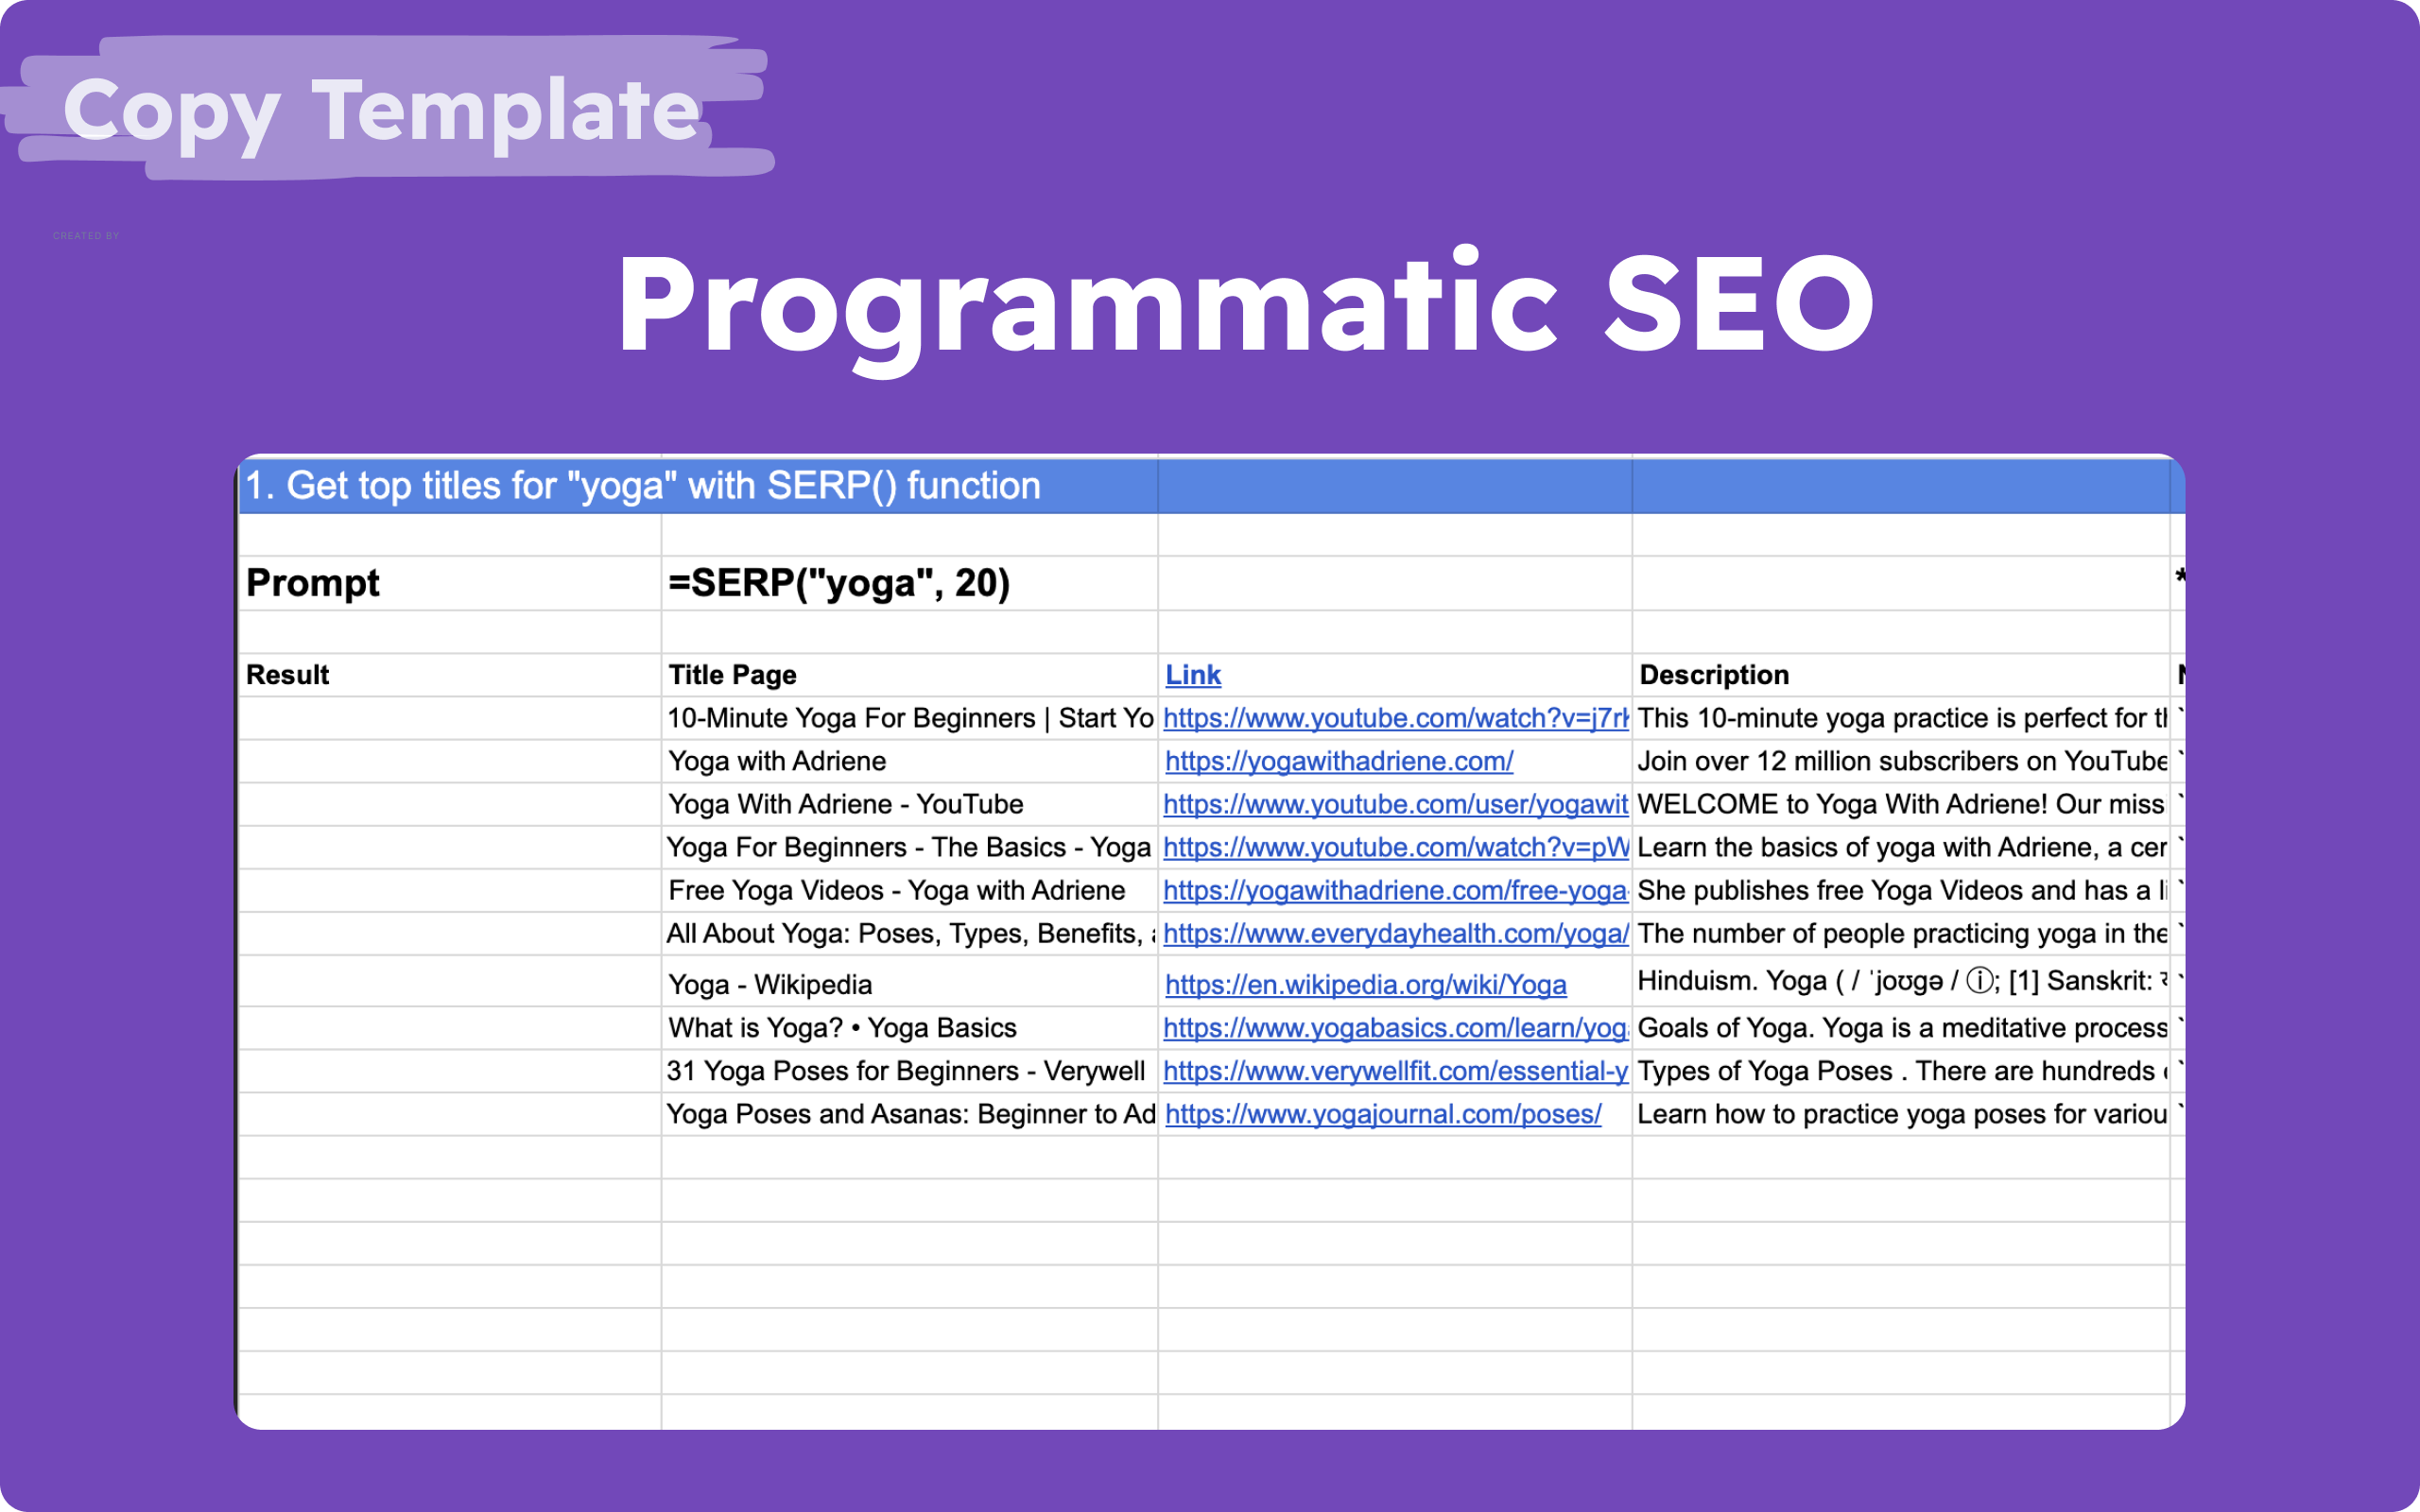 gpt for sheets - template for programmatic seo